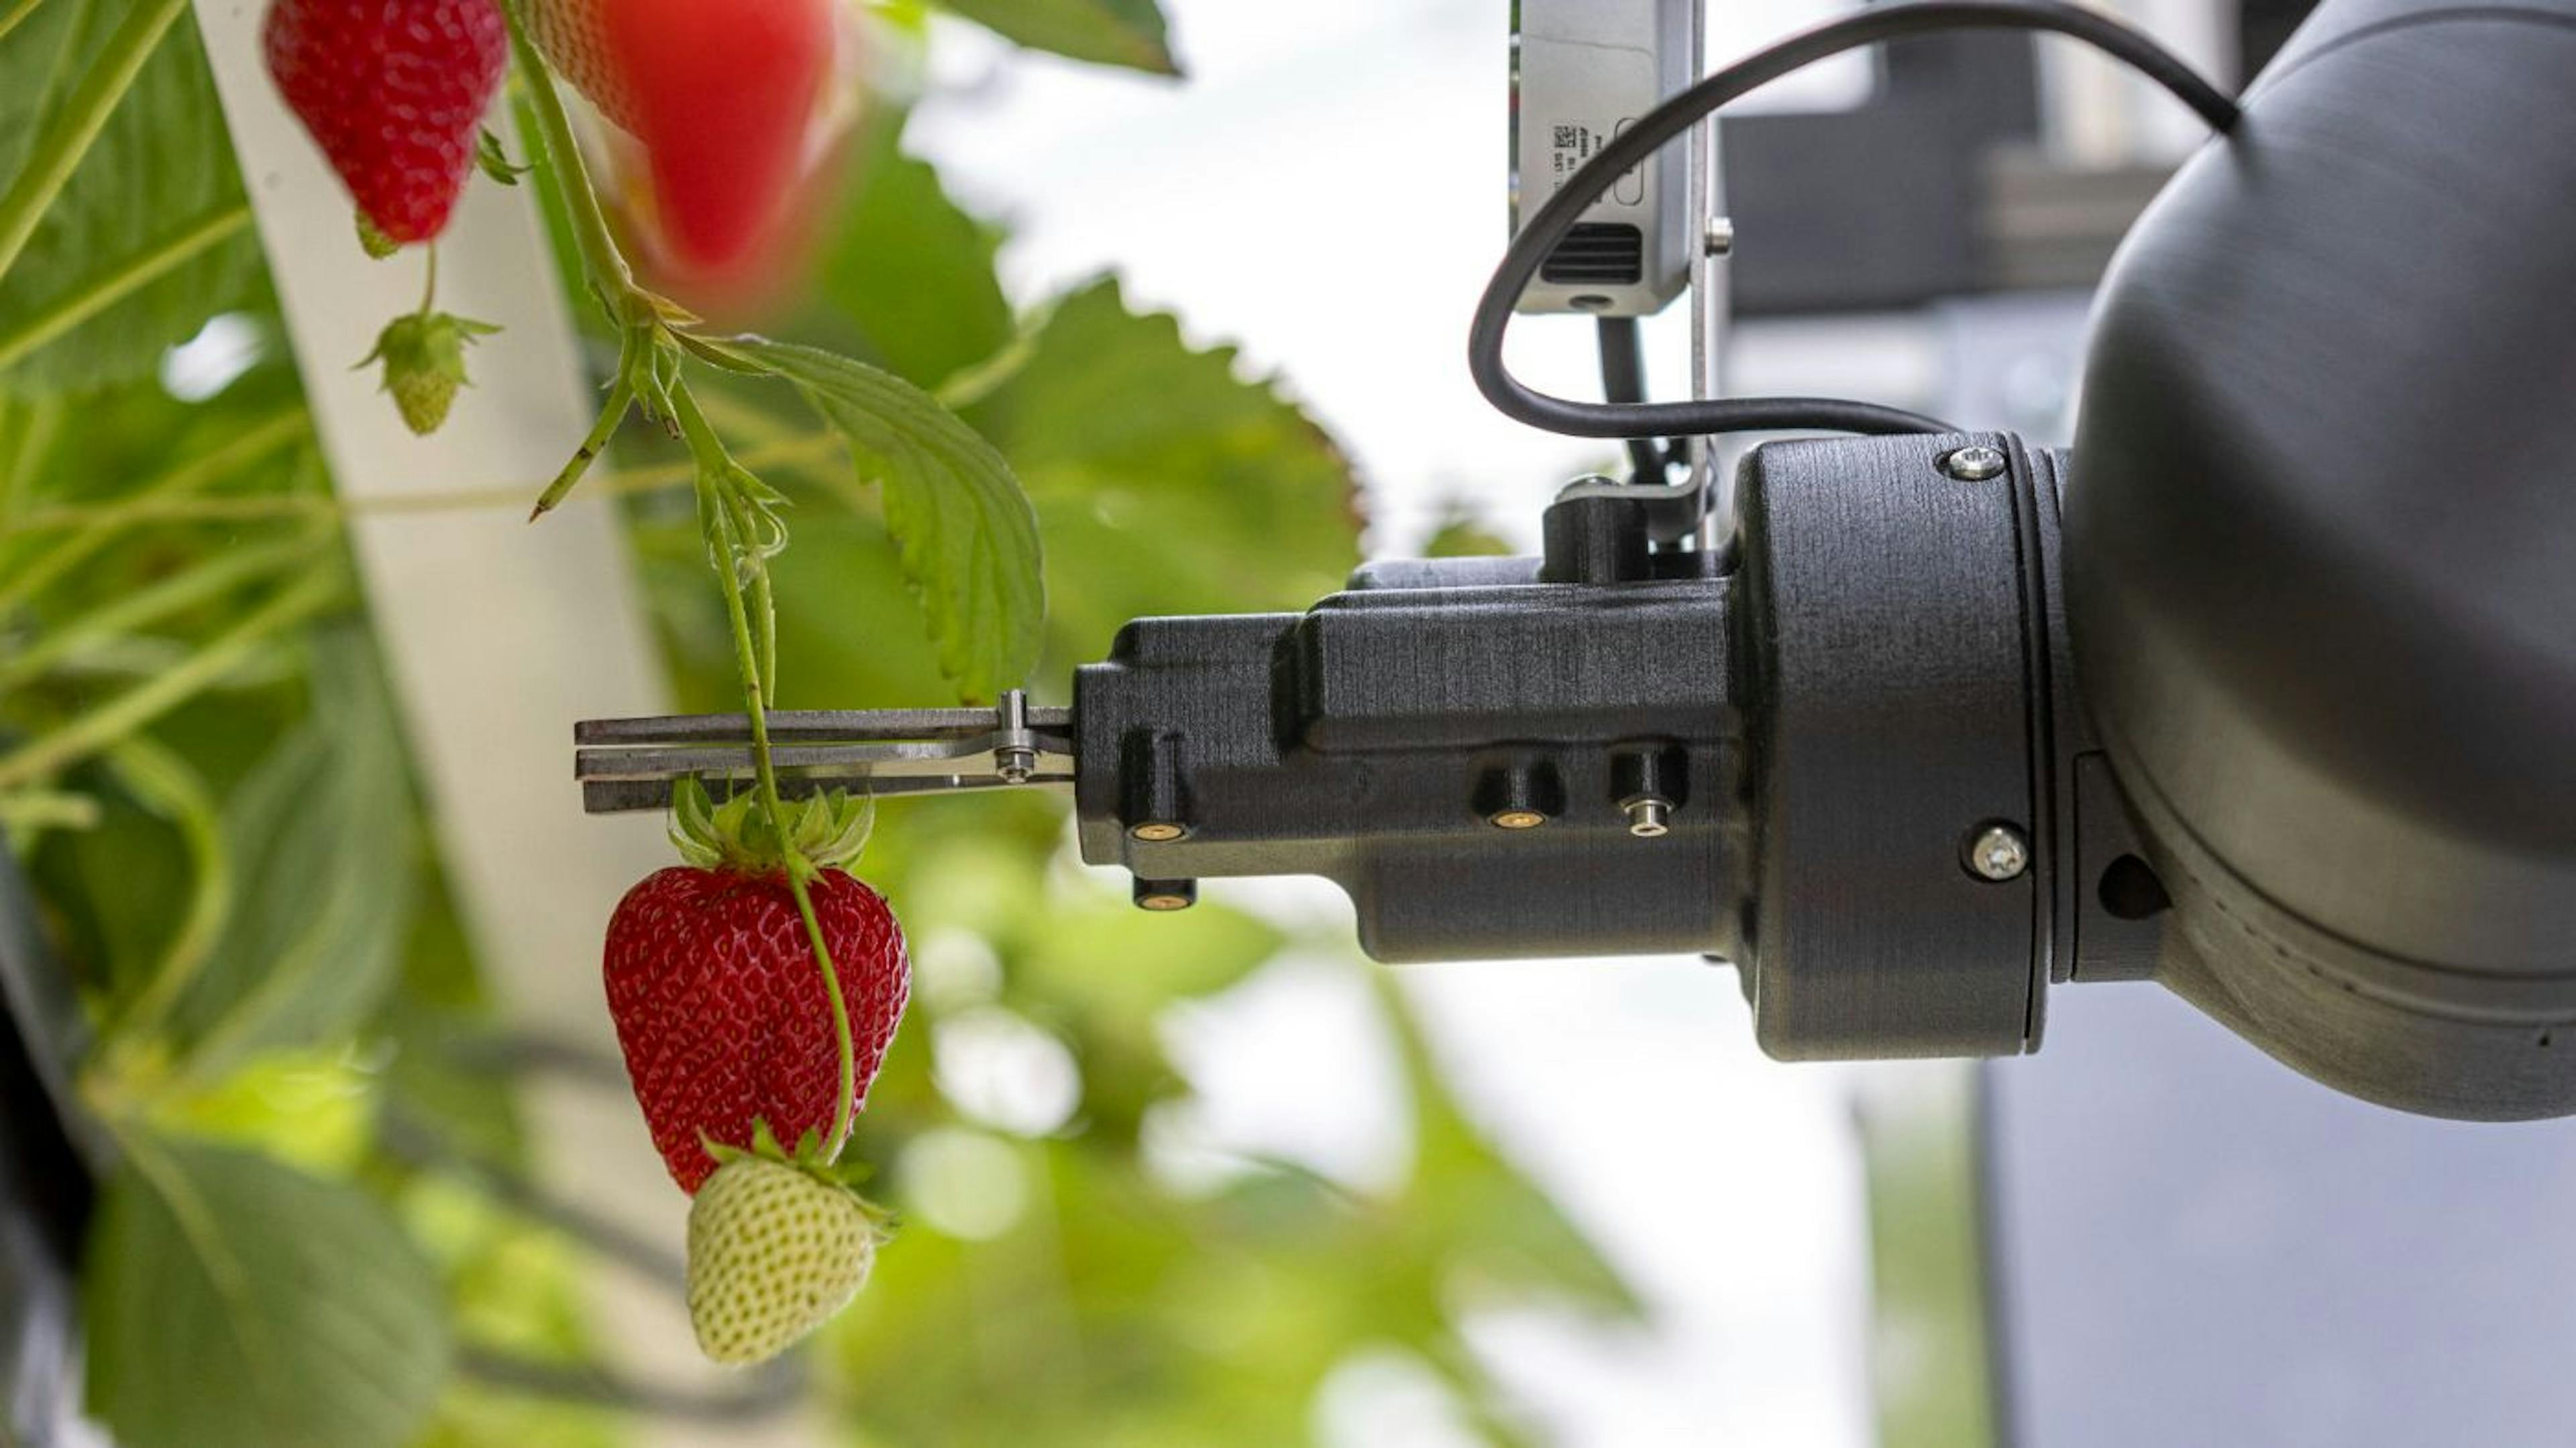 featured image - Robotics in Agriculture: Cultivating the Future